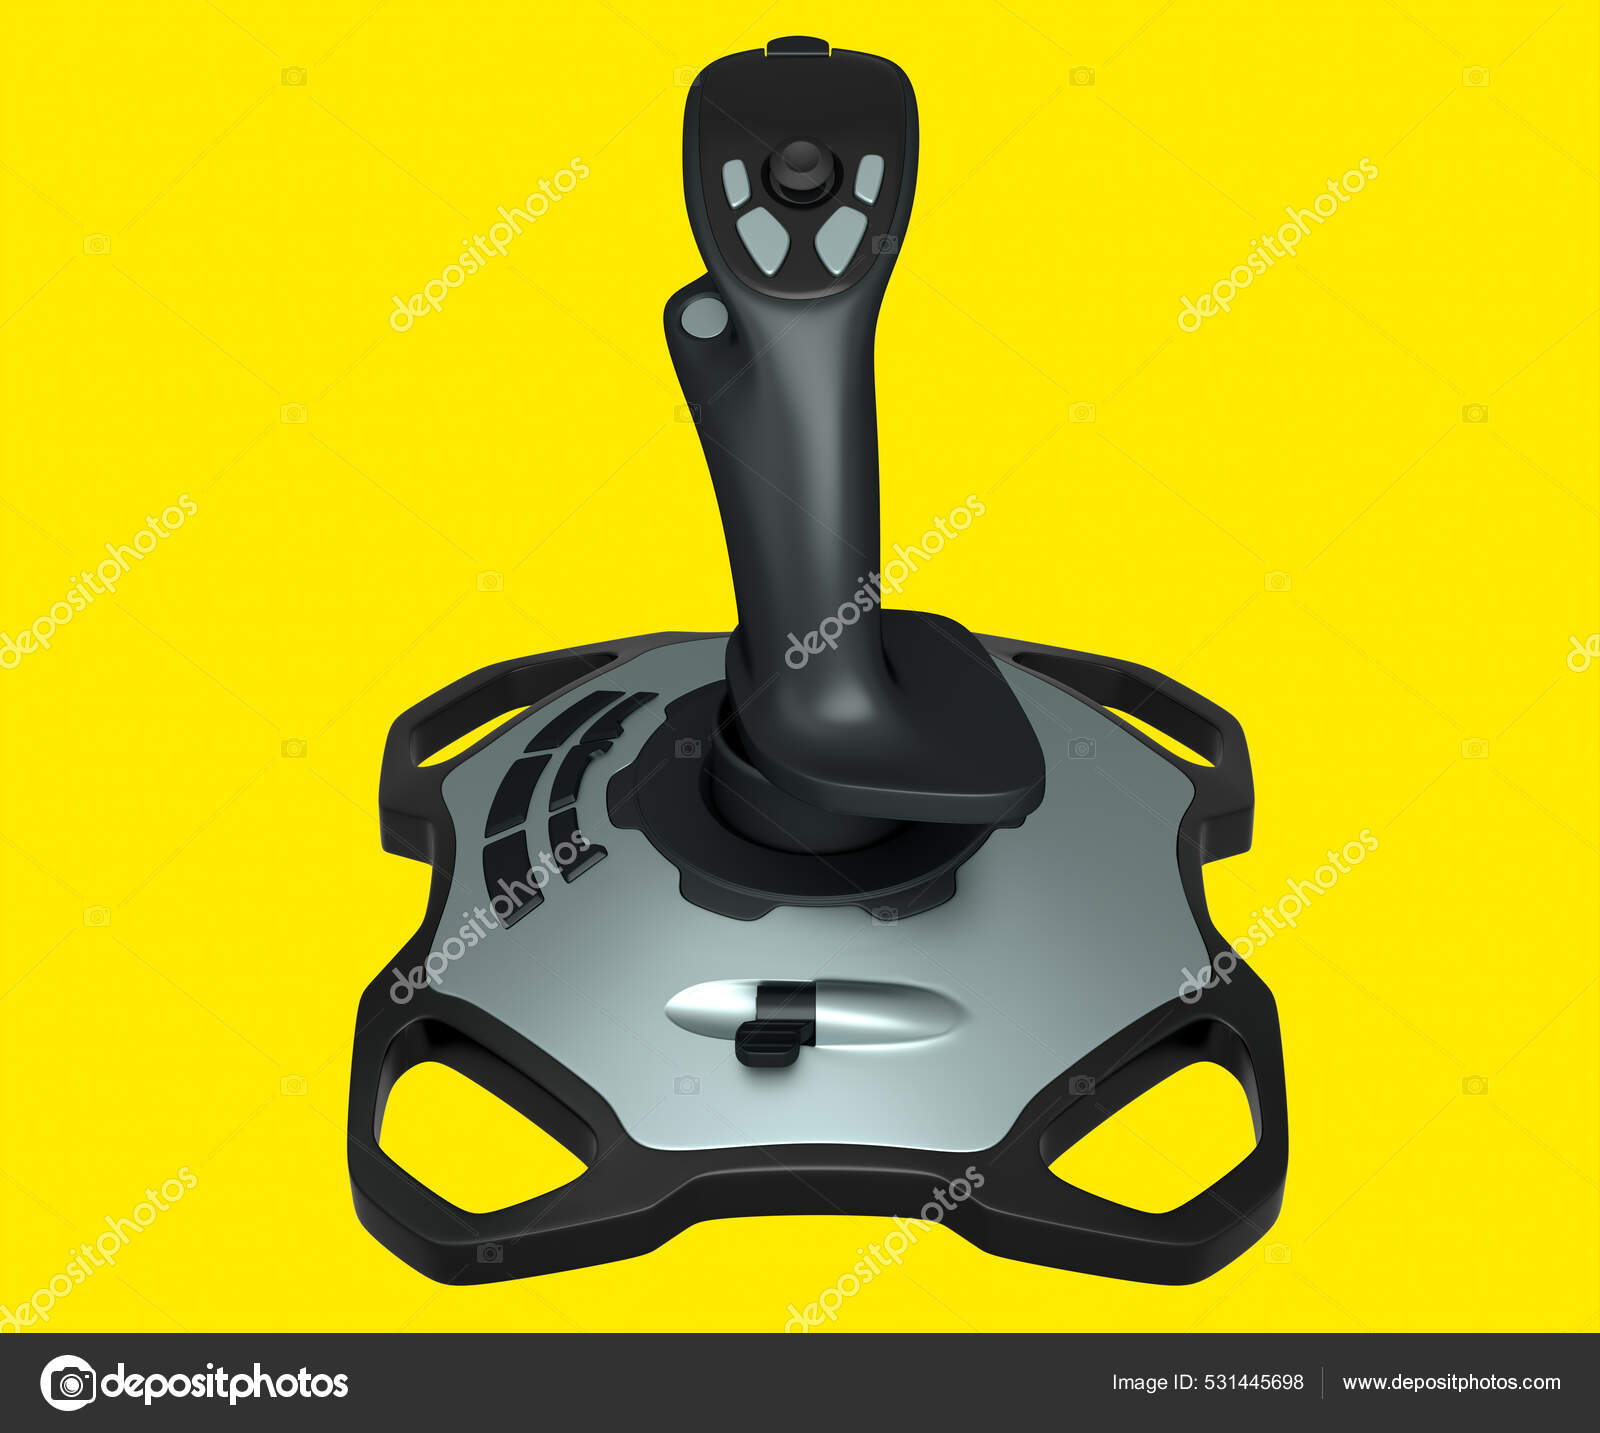 Realistic Joystick Flight Simulator Isolated Yellow Background Rendering  Streaming Gear Stock Illustration by ©CheersGroup #531445698